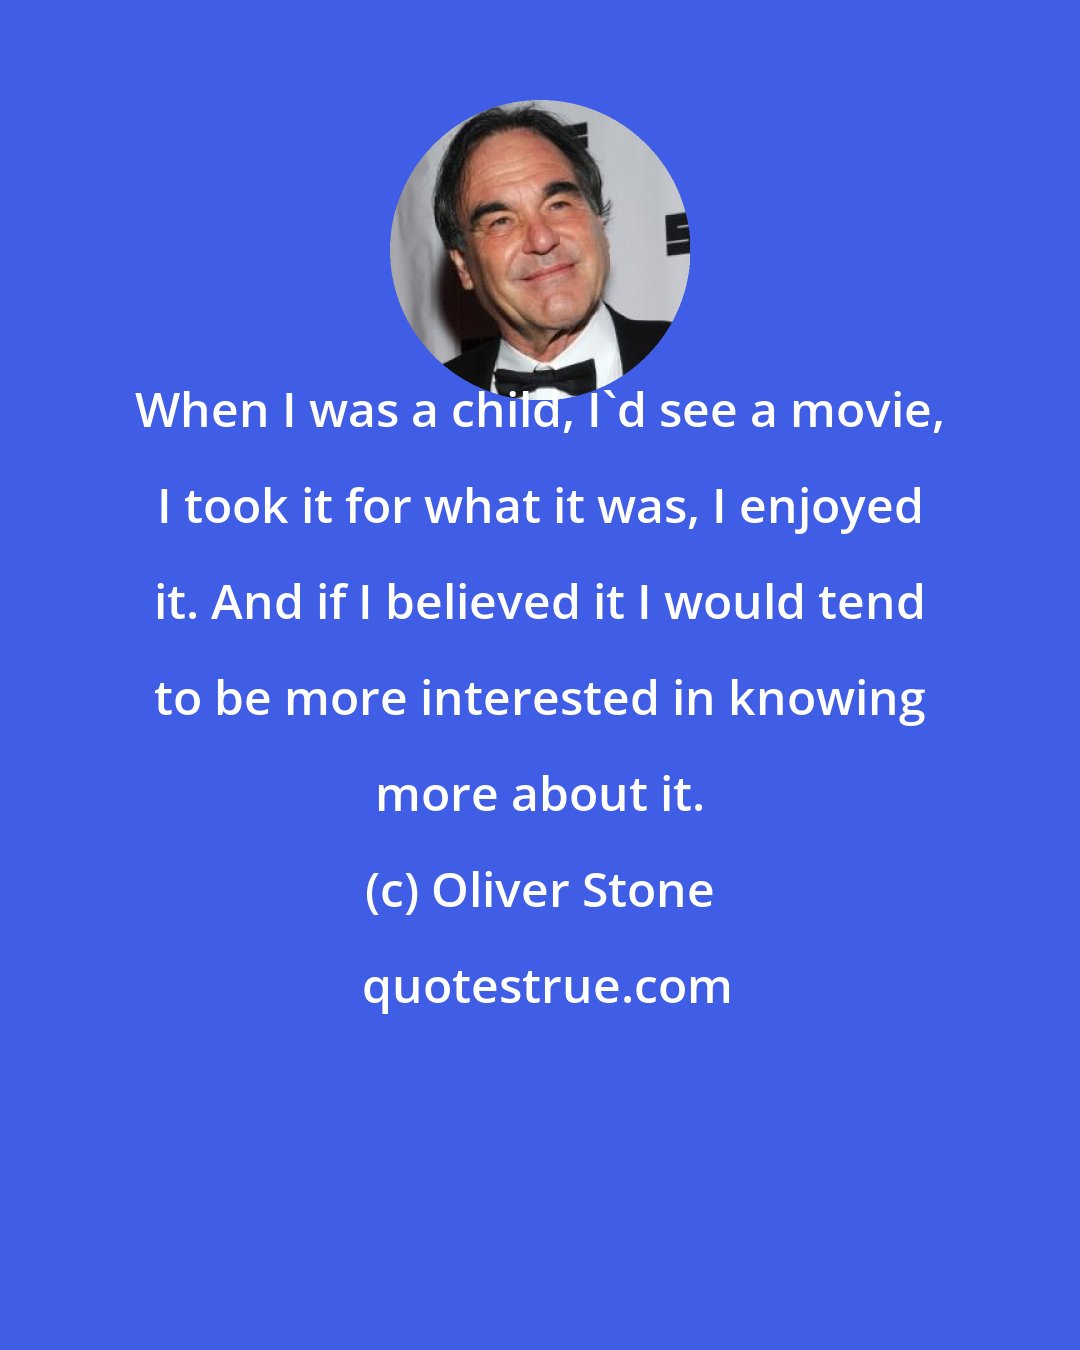 Oliver Stone: When I was a child, I'd see a movie, I took it for what it was, I enjoyed it. And if I believed it I would tend to be more interested in knowing more about it.